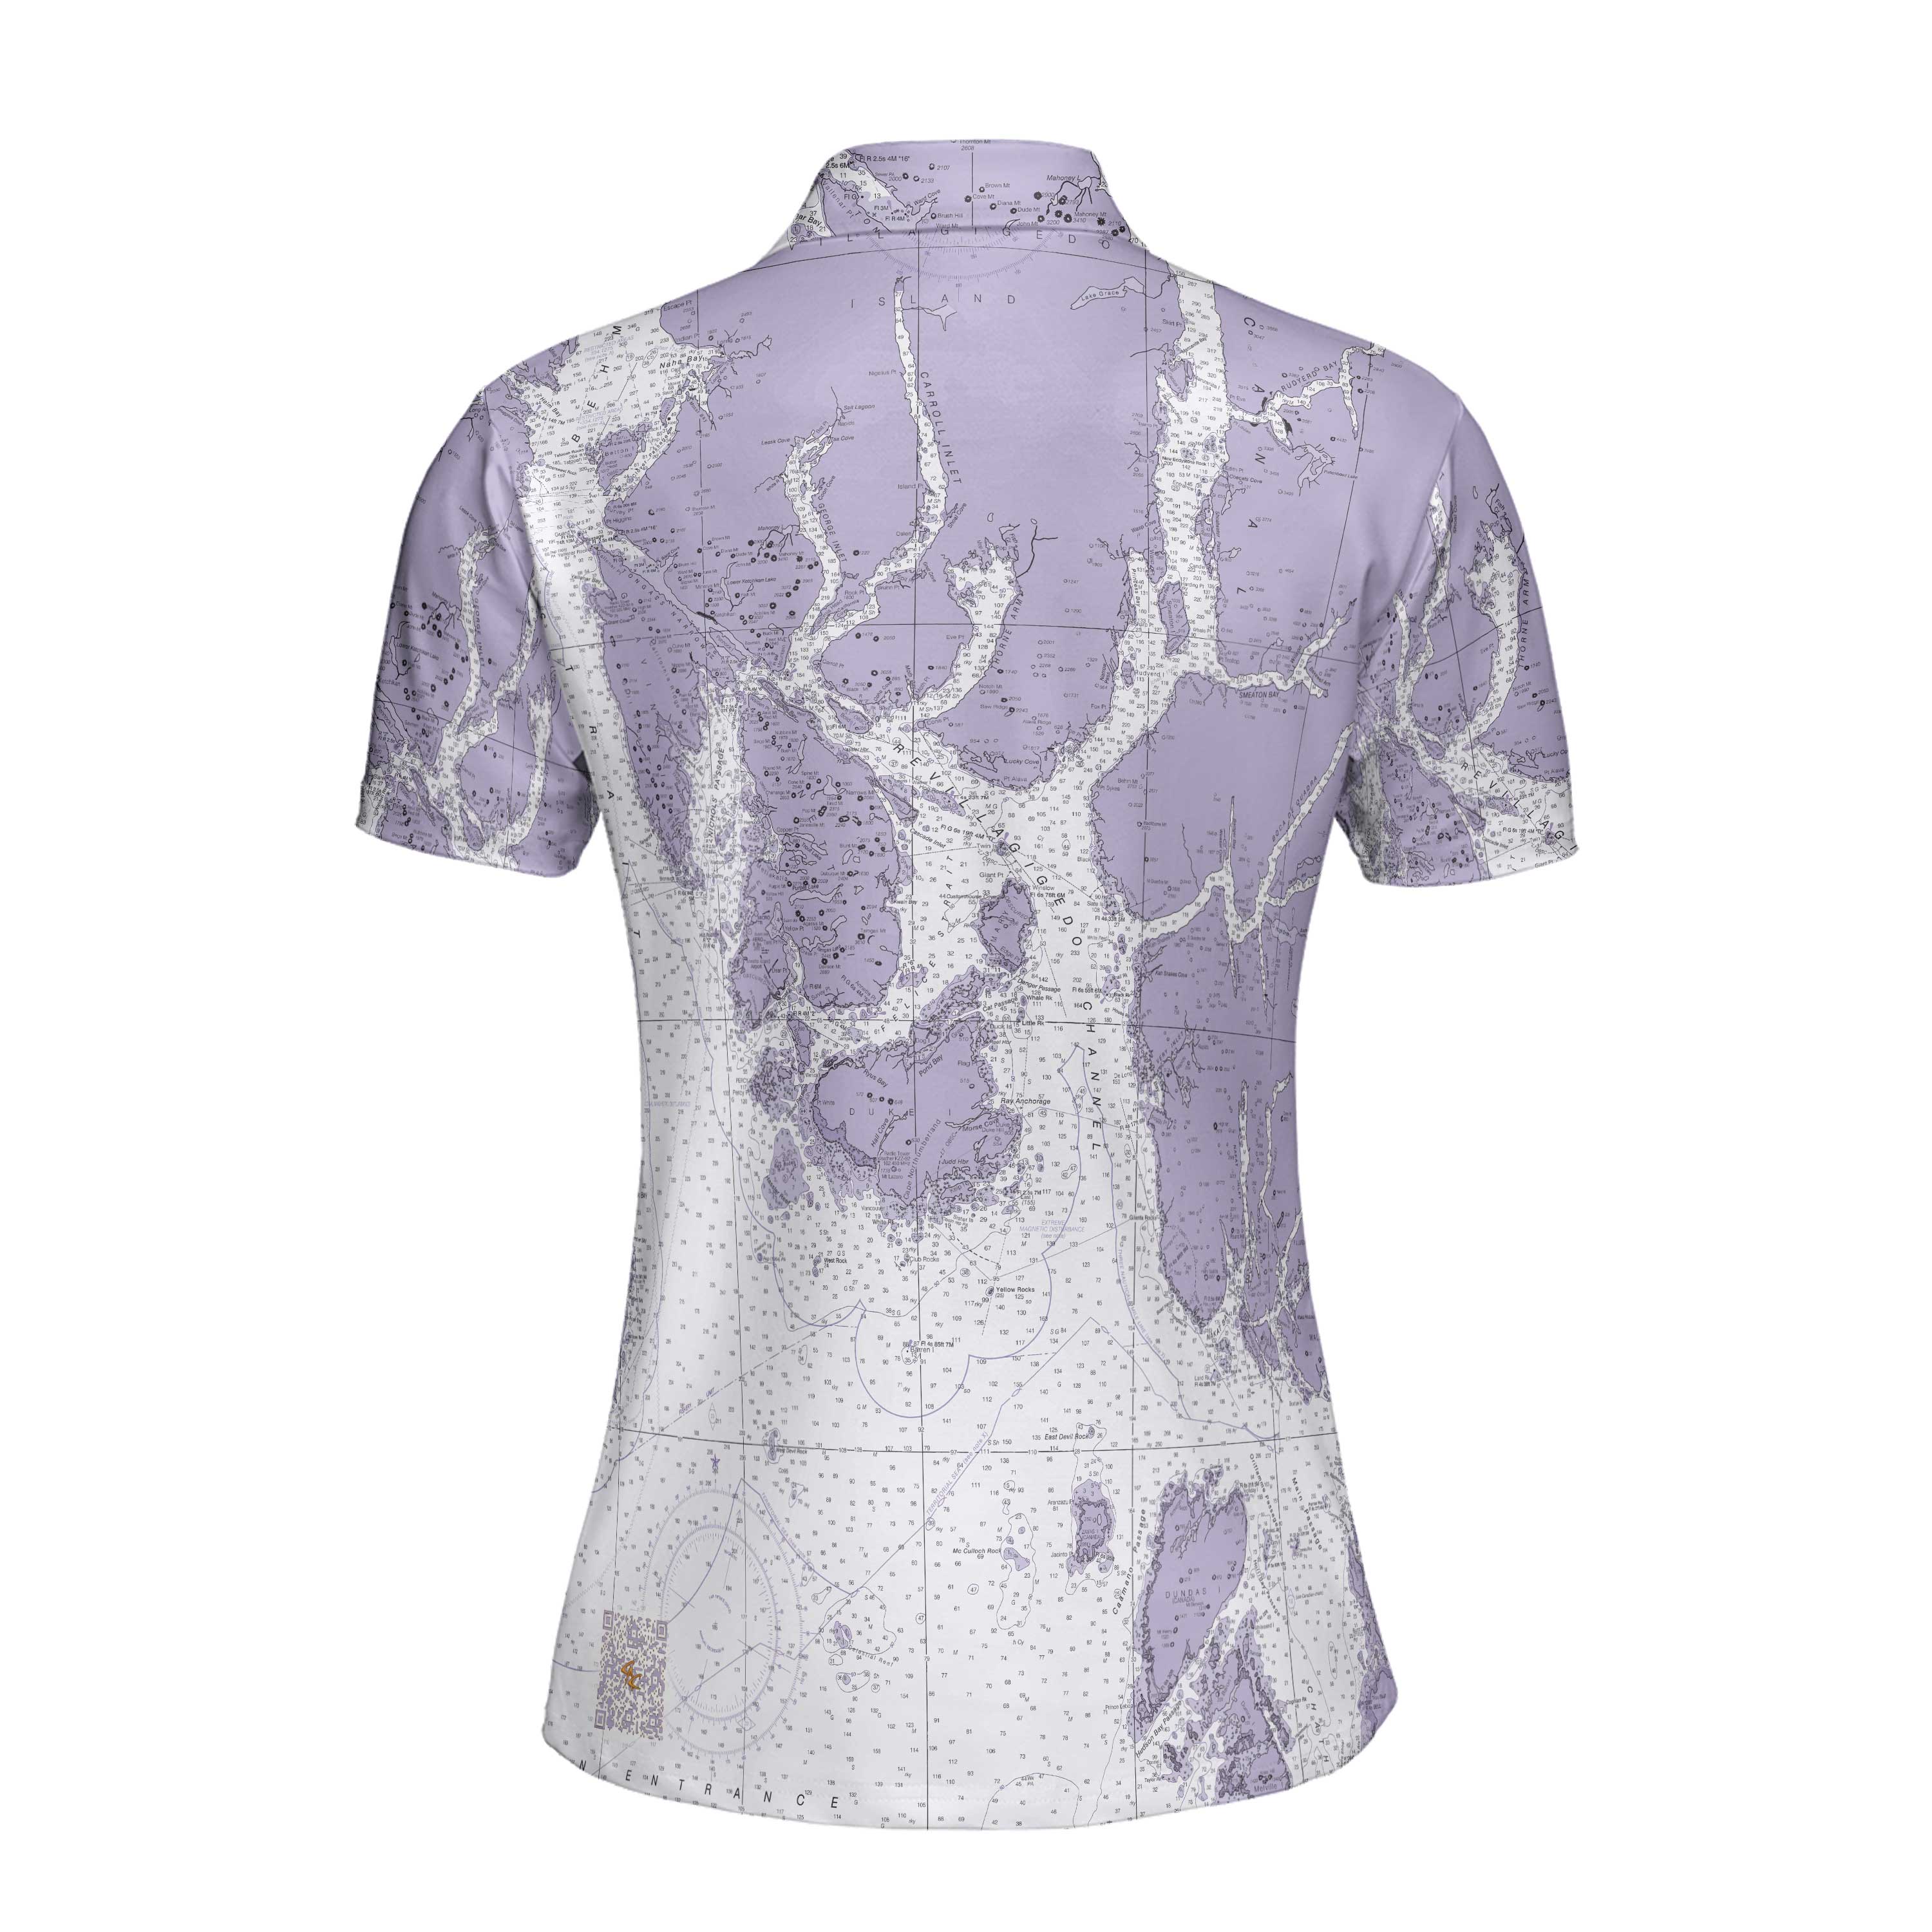 The CAC Violet Ketchikan Women's Polo